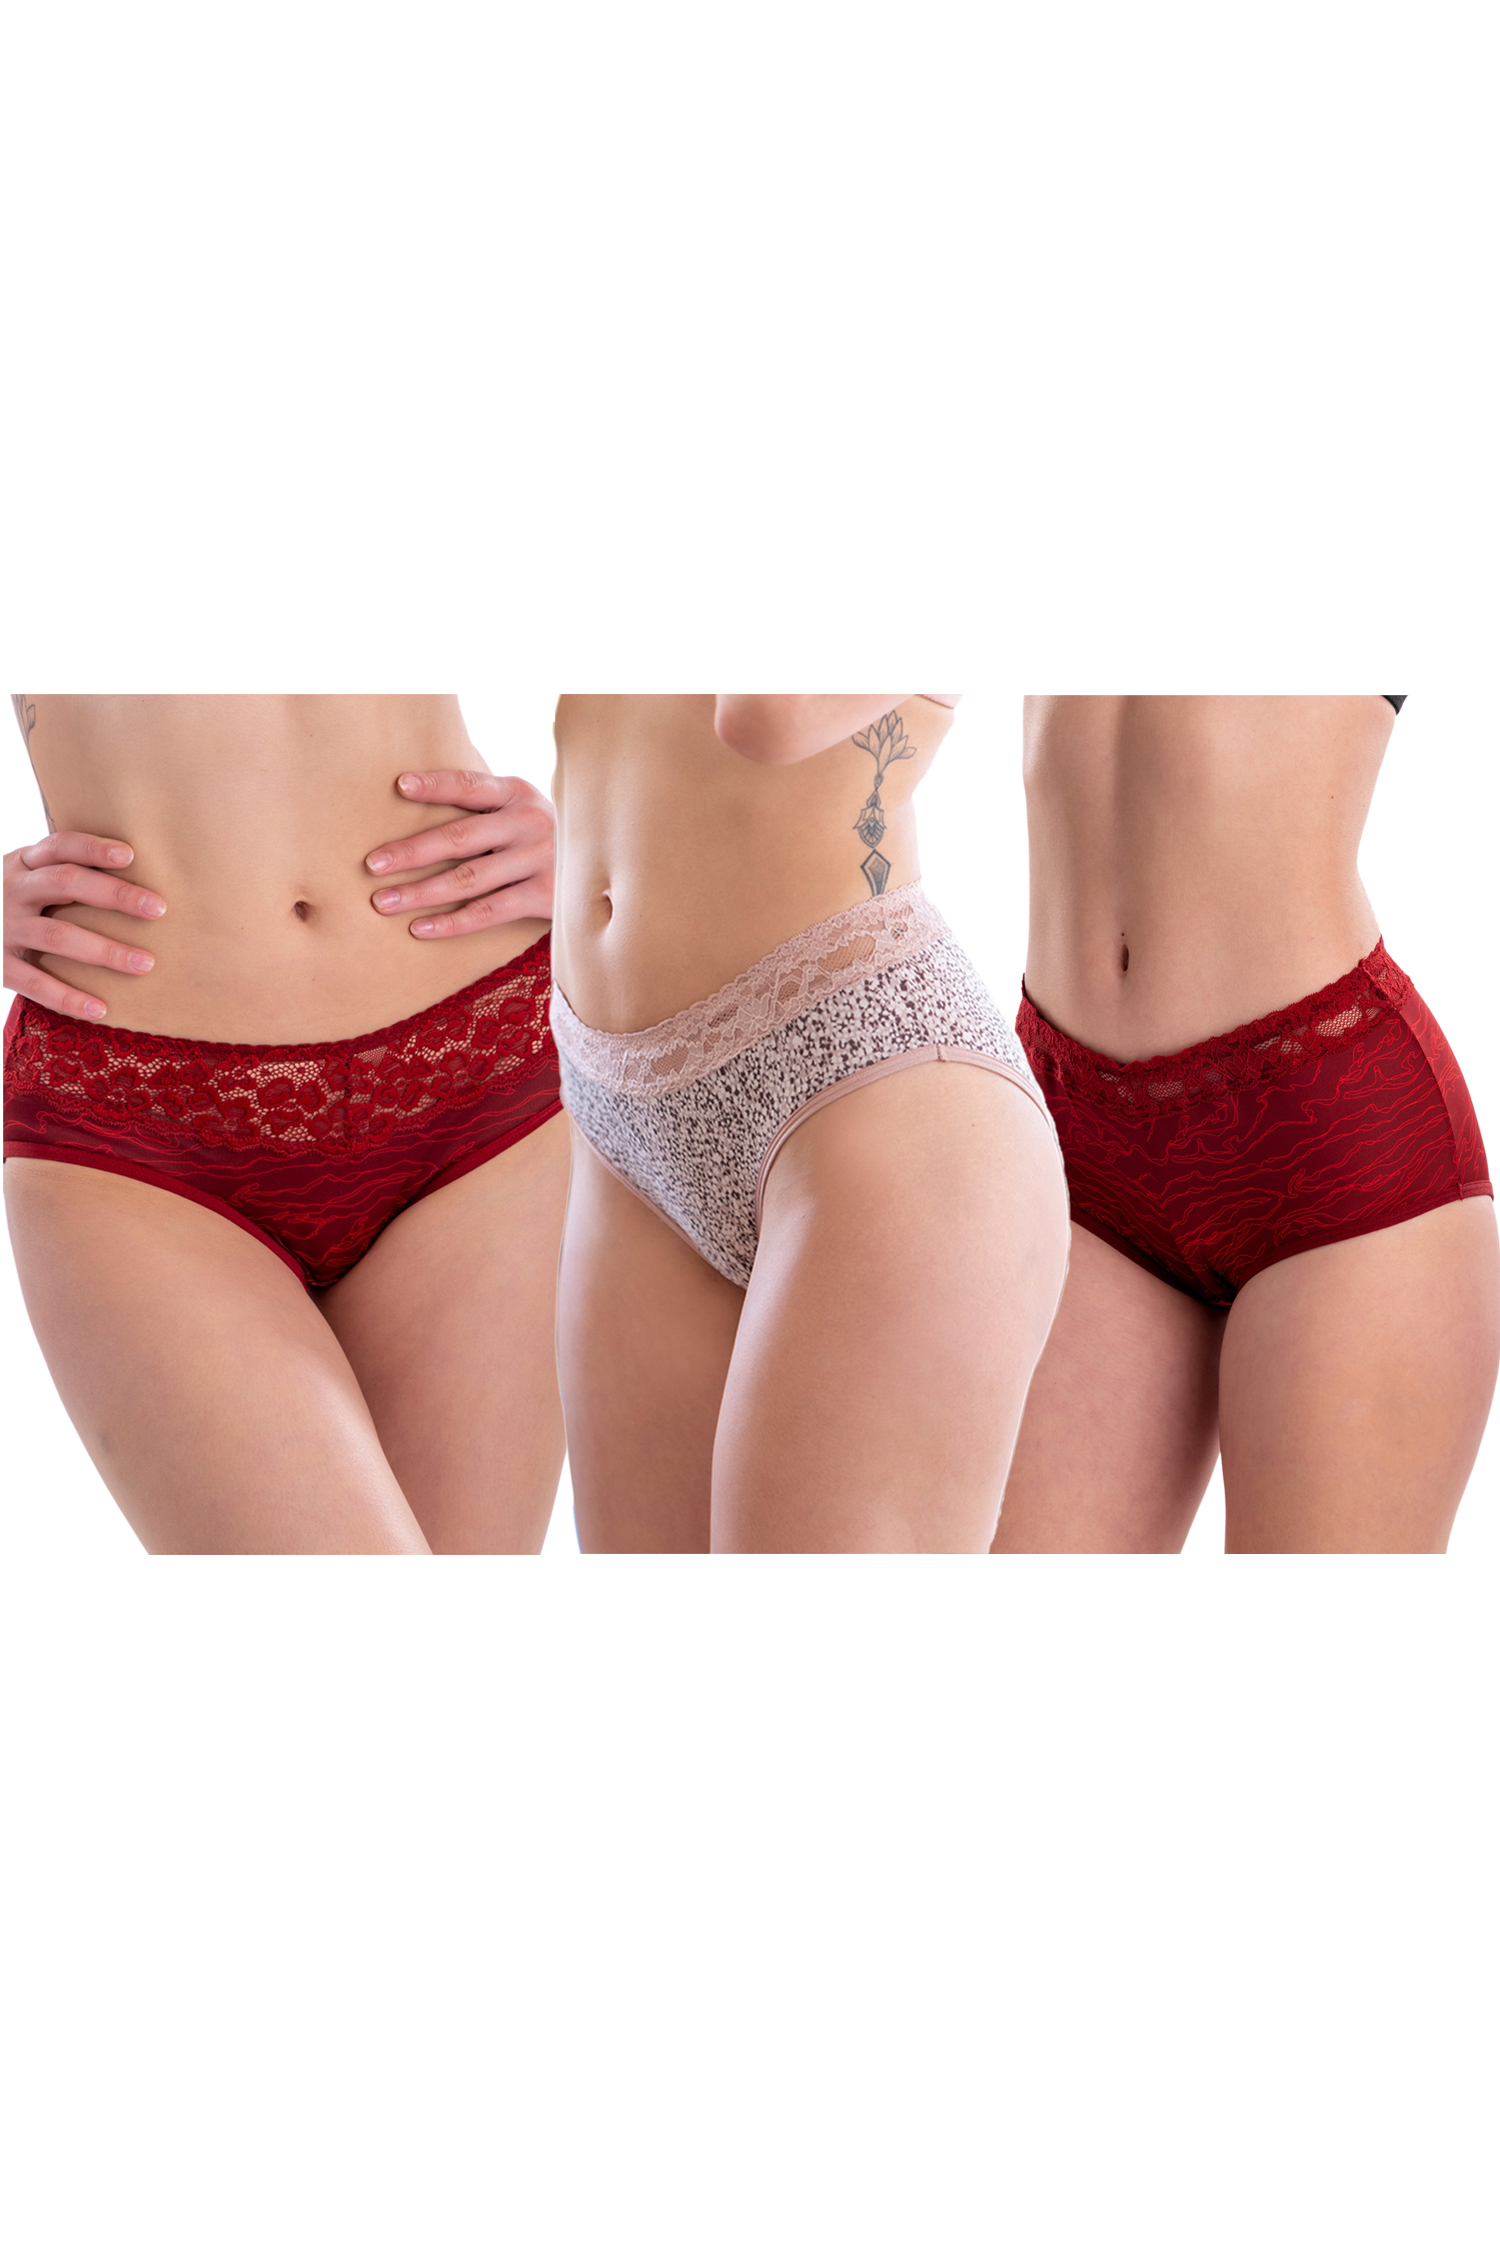 Women Bikini Lacy Red & Skiny Lacy (Pack of 3)